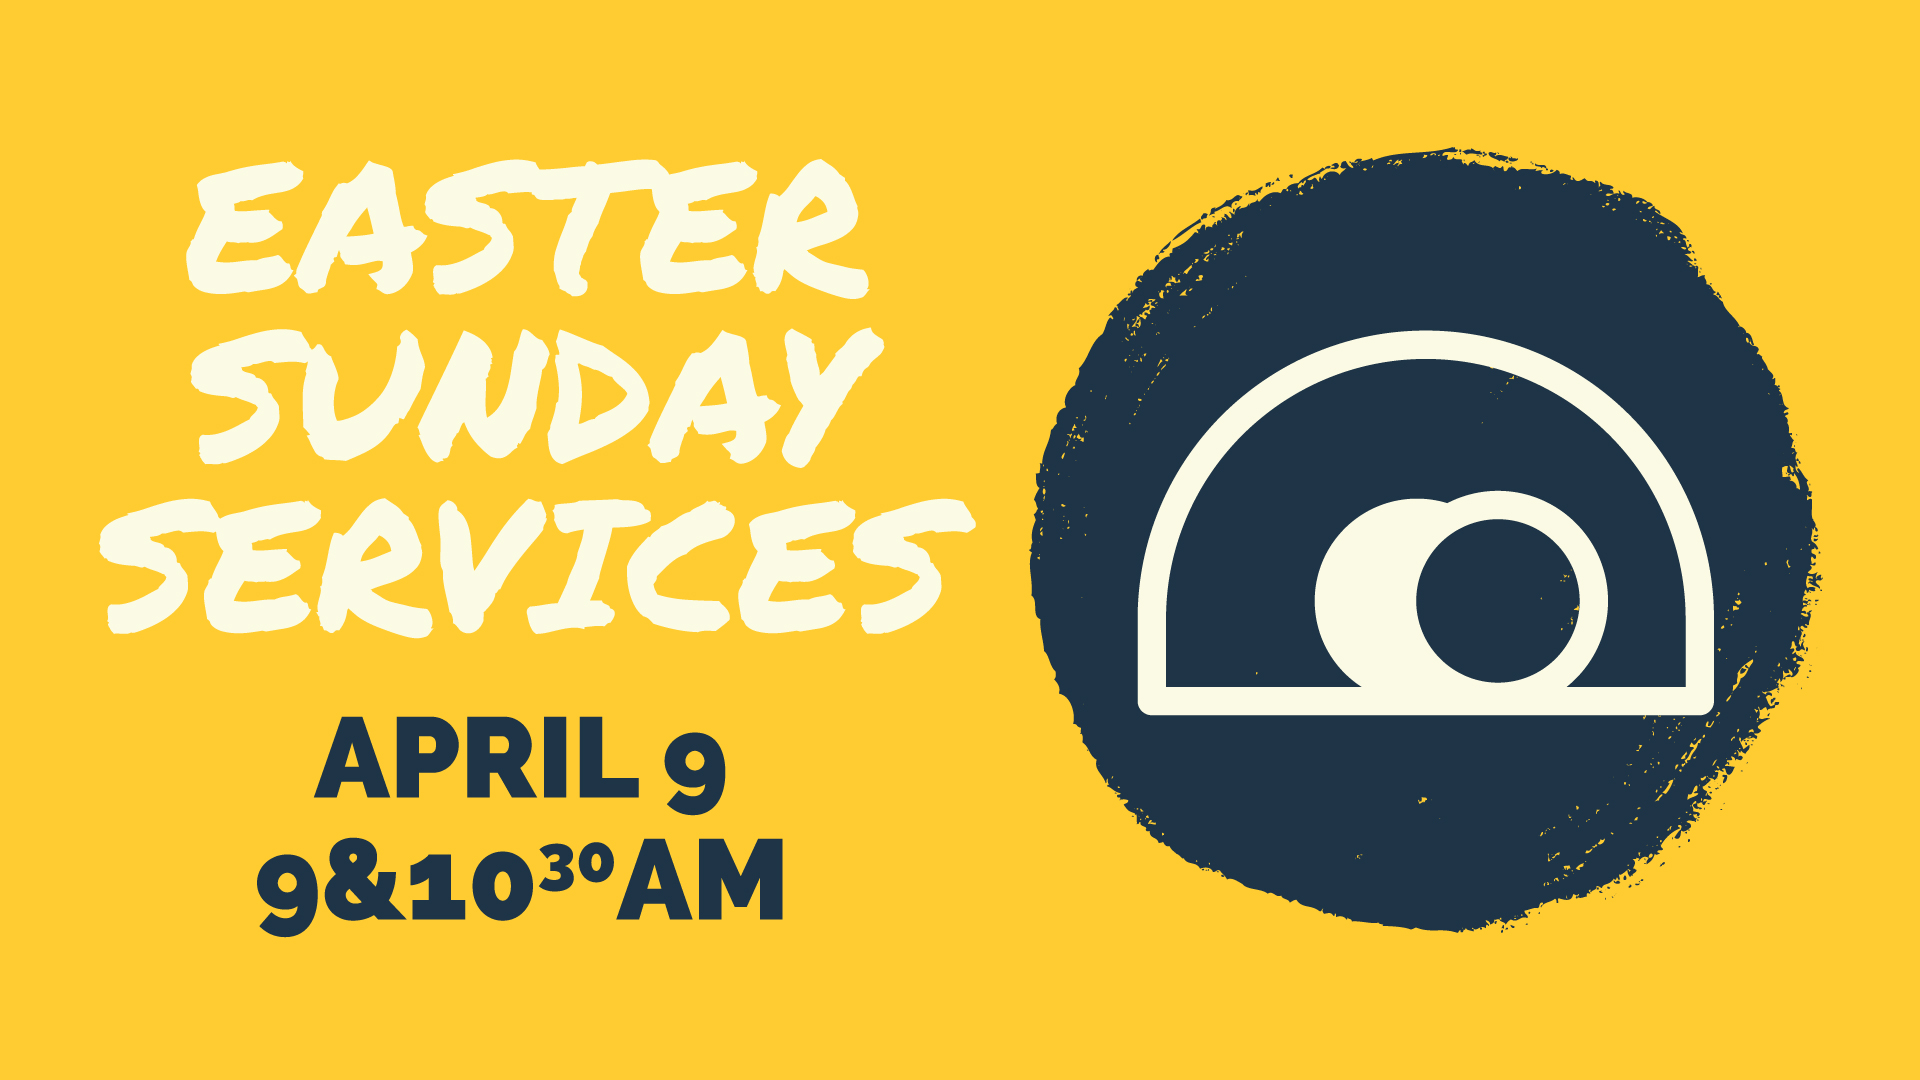 Easter Sunday Services | April 9 at 9 & 10:30AM